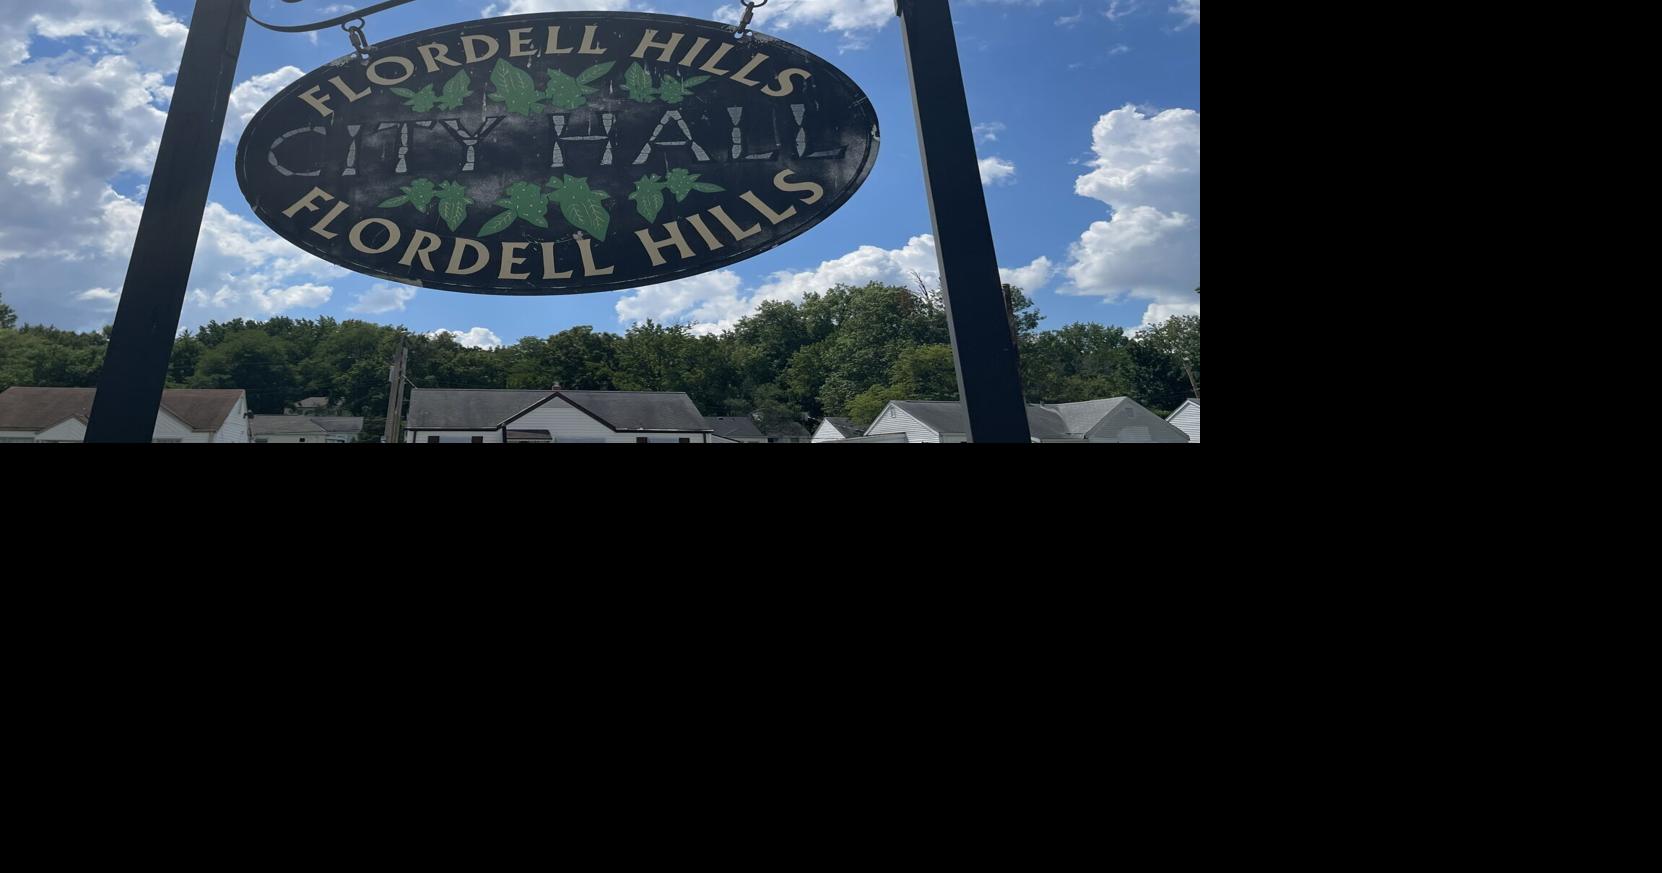 Two ex Flordell Hills officials charged with embezzling $663 000 from city